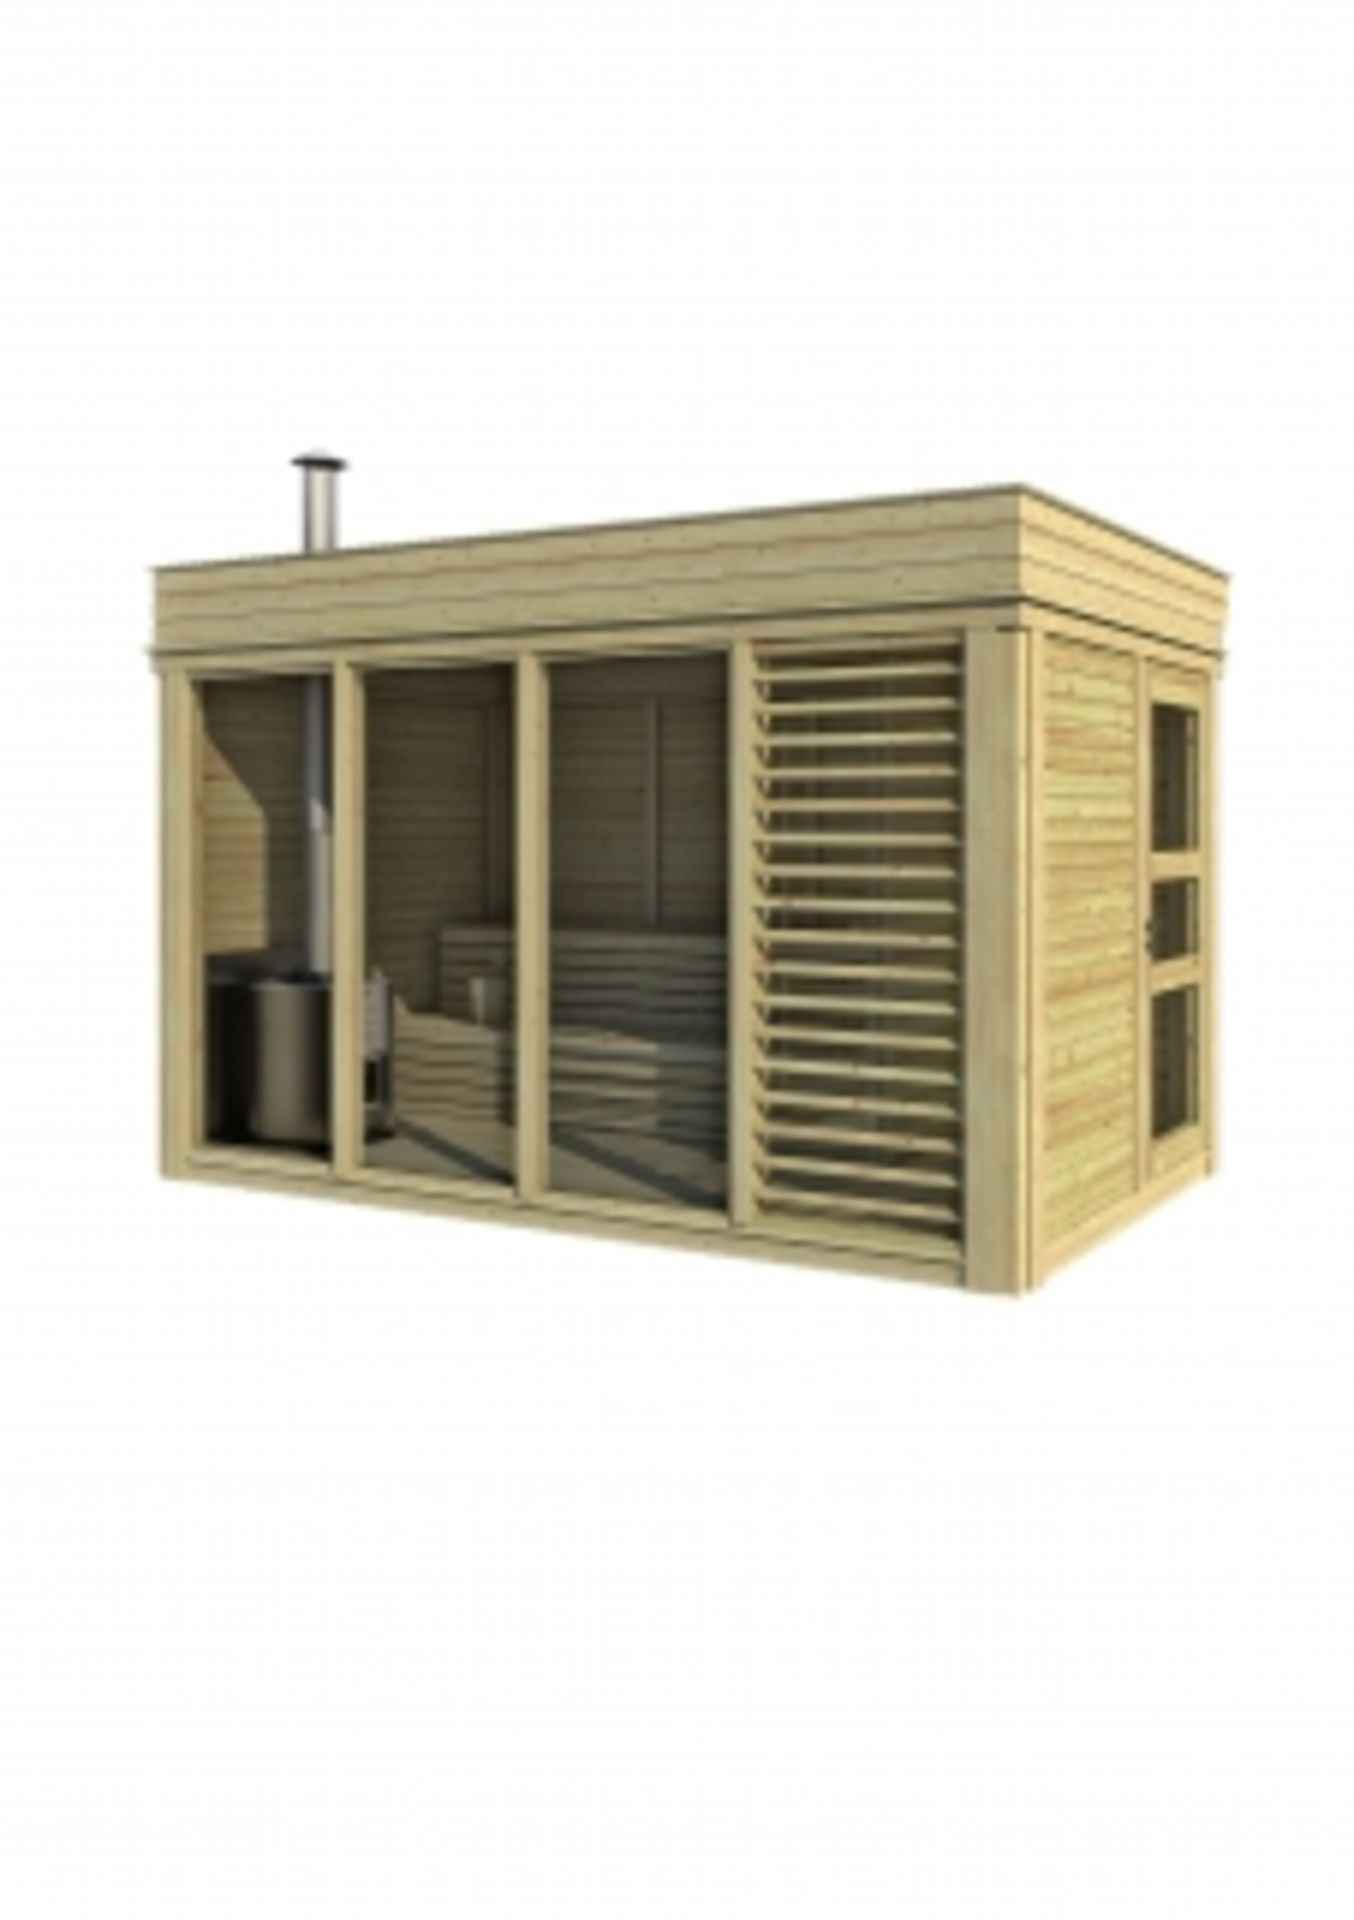 V Brand New 2 x 4m Sauna Cube With Changing Room - Made From Spruce Wood - Roof Covered With Black